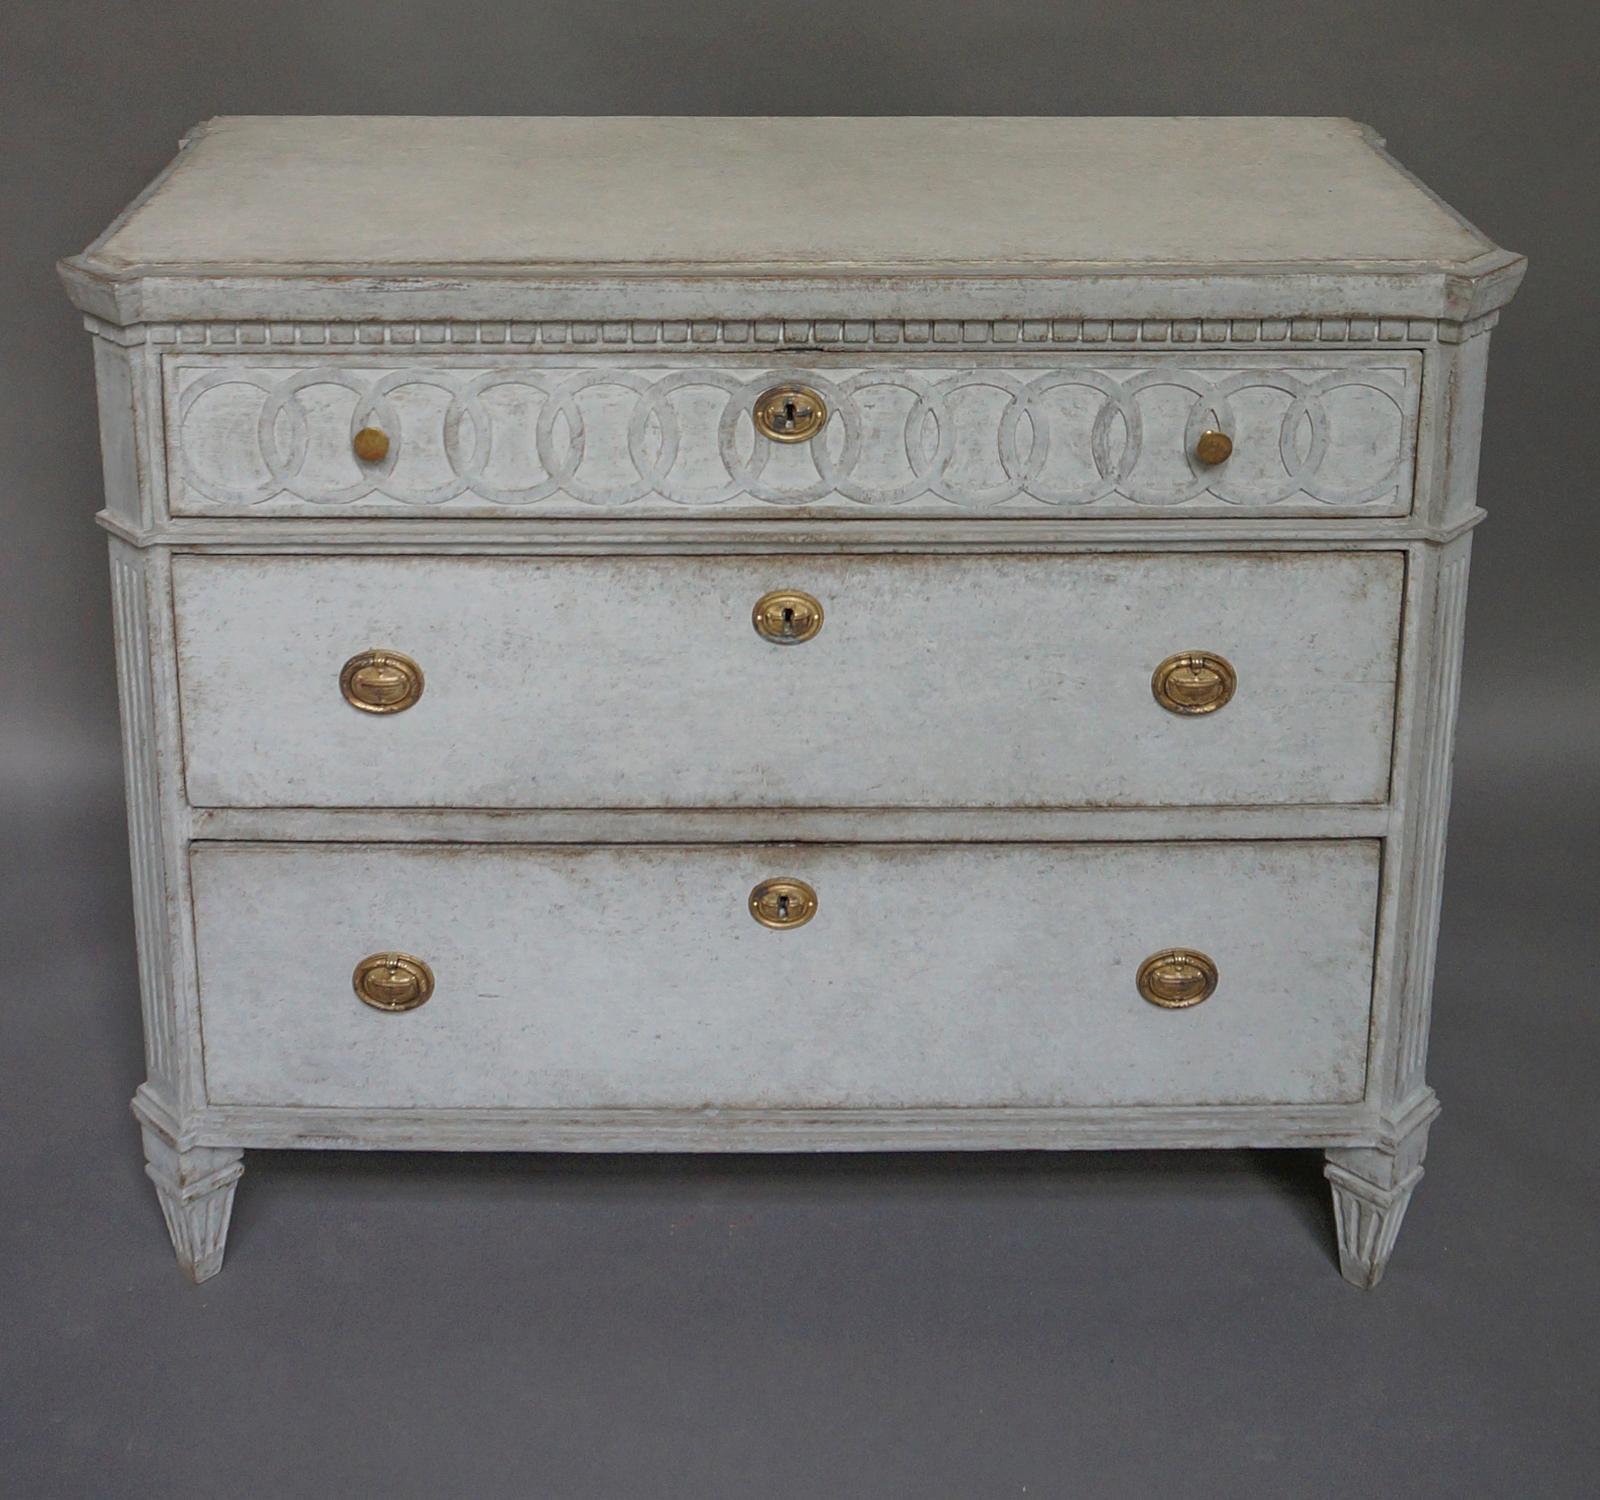 Neoclassical chest of drawers, Sweden circa 1860, with a panel of raised interlocking rings on the top drawer. Shaped top and chamfered corners with reeded detail over tapering square feet. Brass hardware of the period.